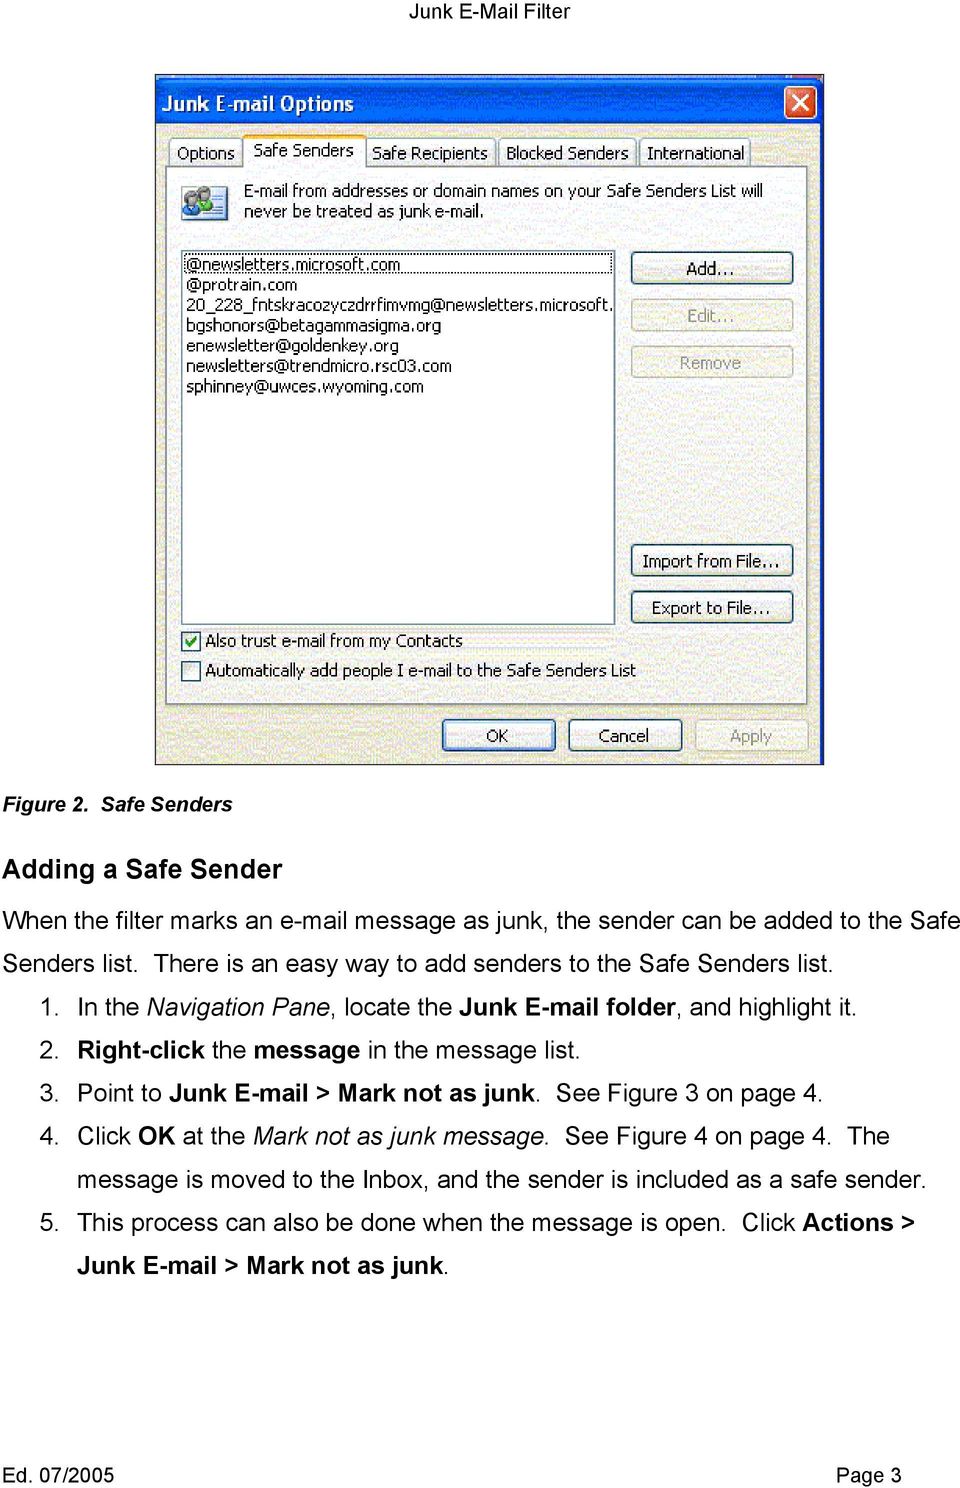 Right-click the message in the message list. 3. Point to Junk E-mail > Mark not as junk. See Figure 3 on page 4. 4. Click OK at the Mark not as junk message.